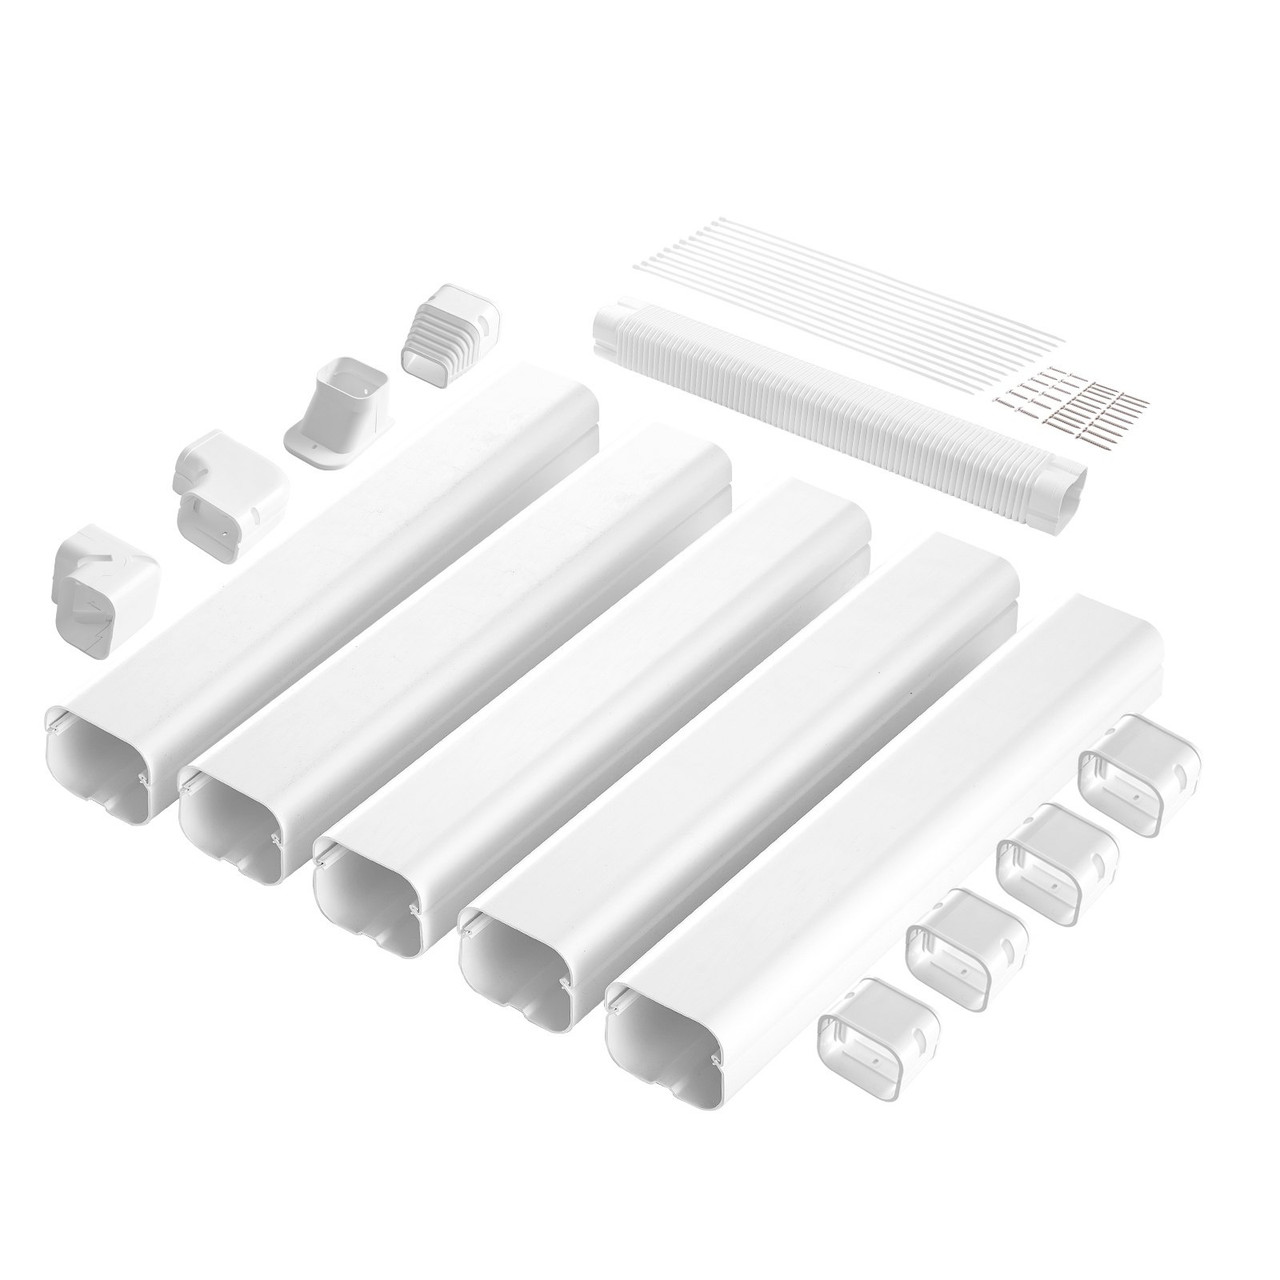 VEVOR Mini Split Line Set Cover 3-inch W 10Ft L, PVC Decorative Pipe Line Cover For Air Conditioner with 5 Straight Ducts & Full Components Easy to Install, Paintable for Heat Pumps, White